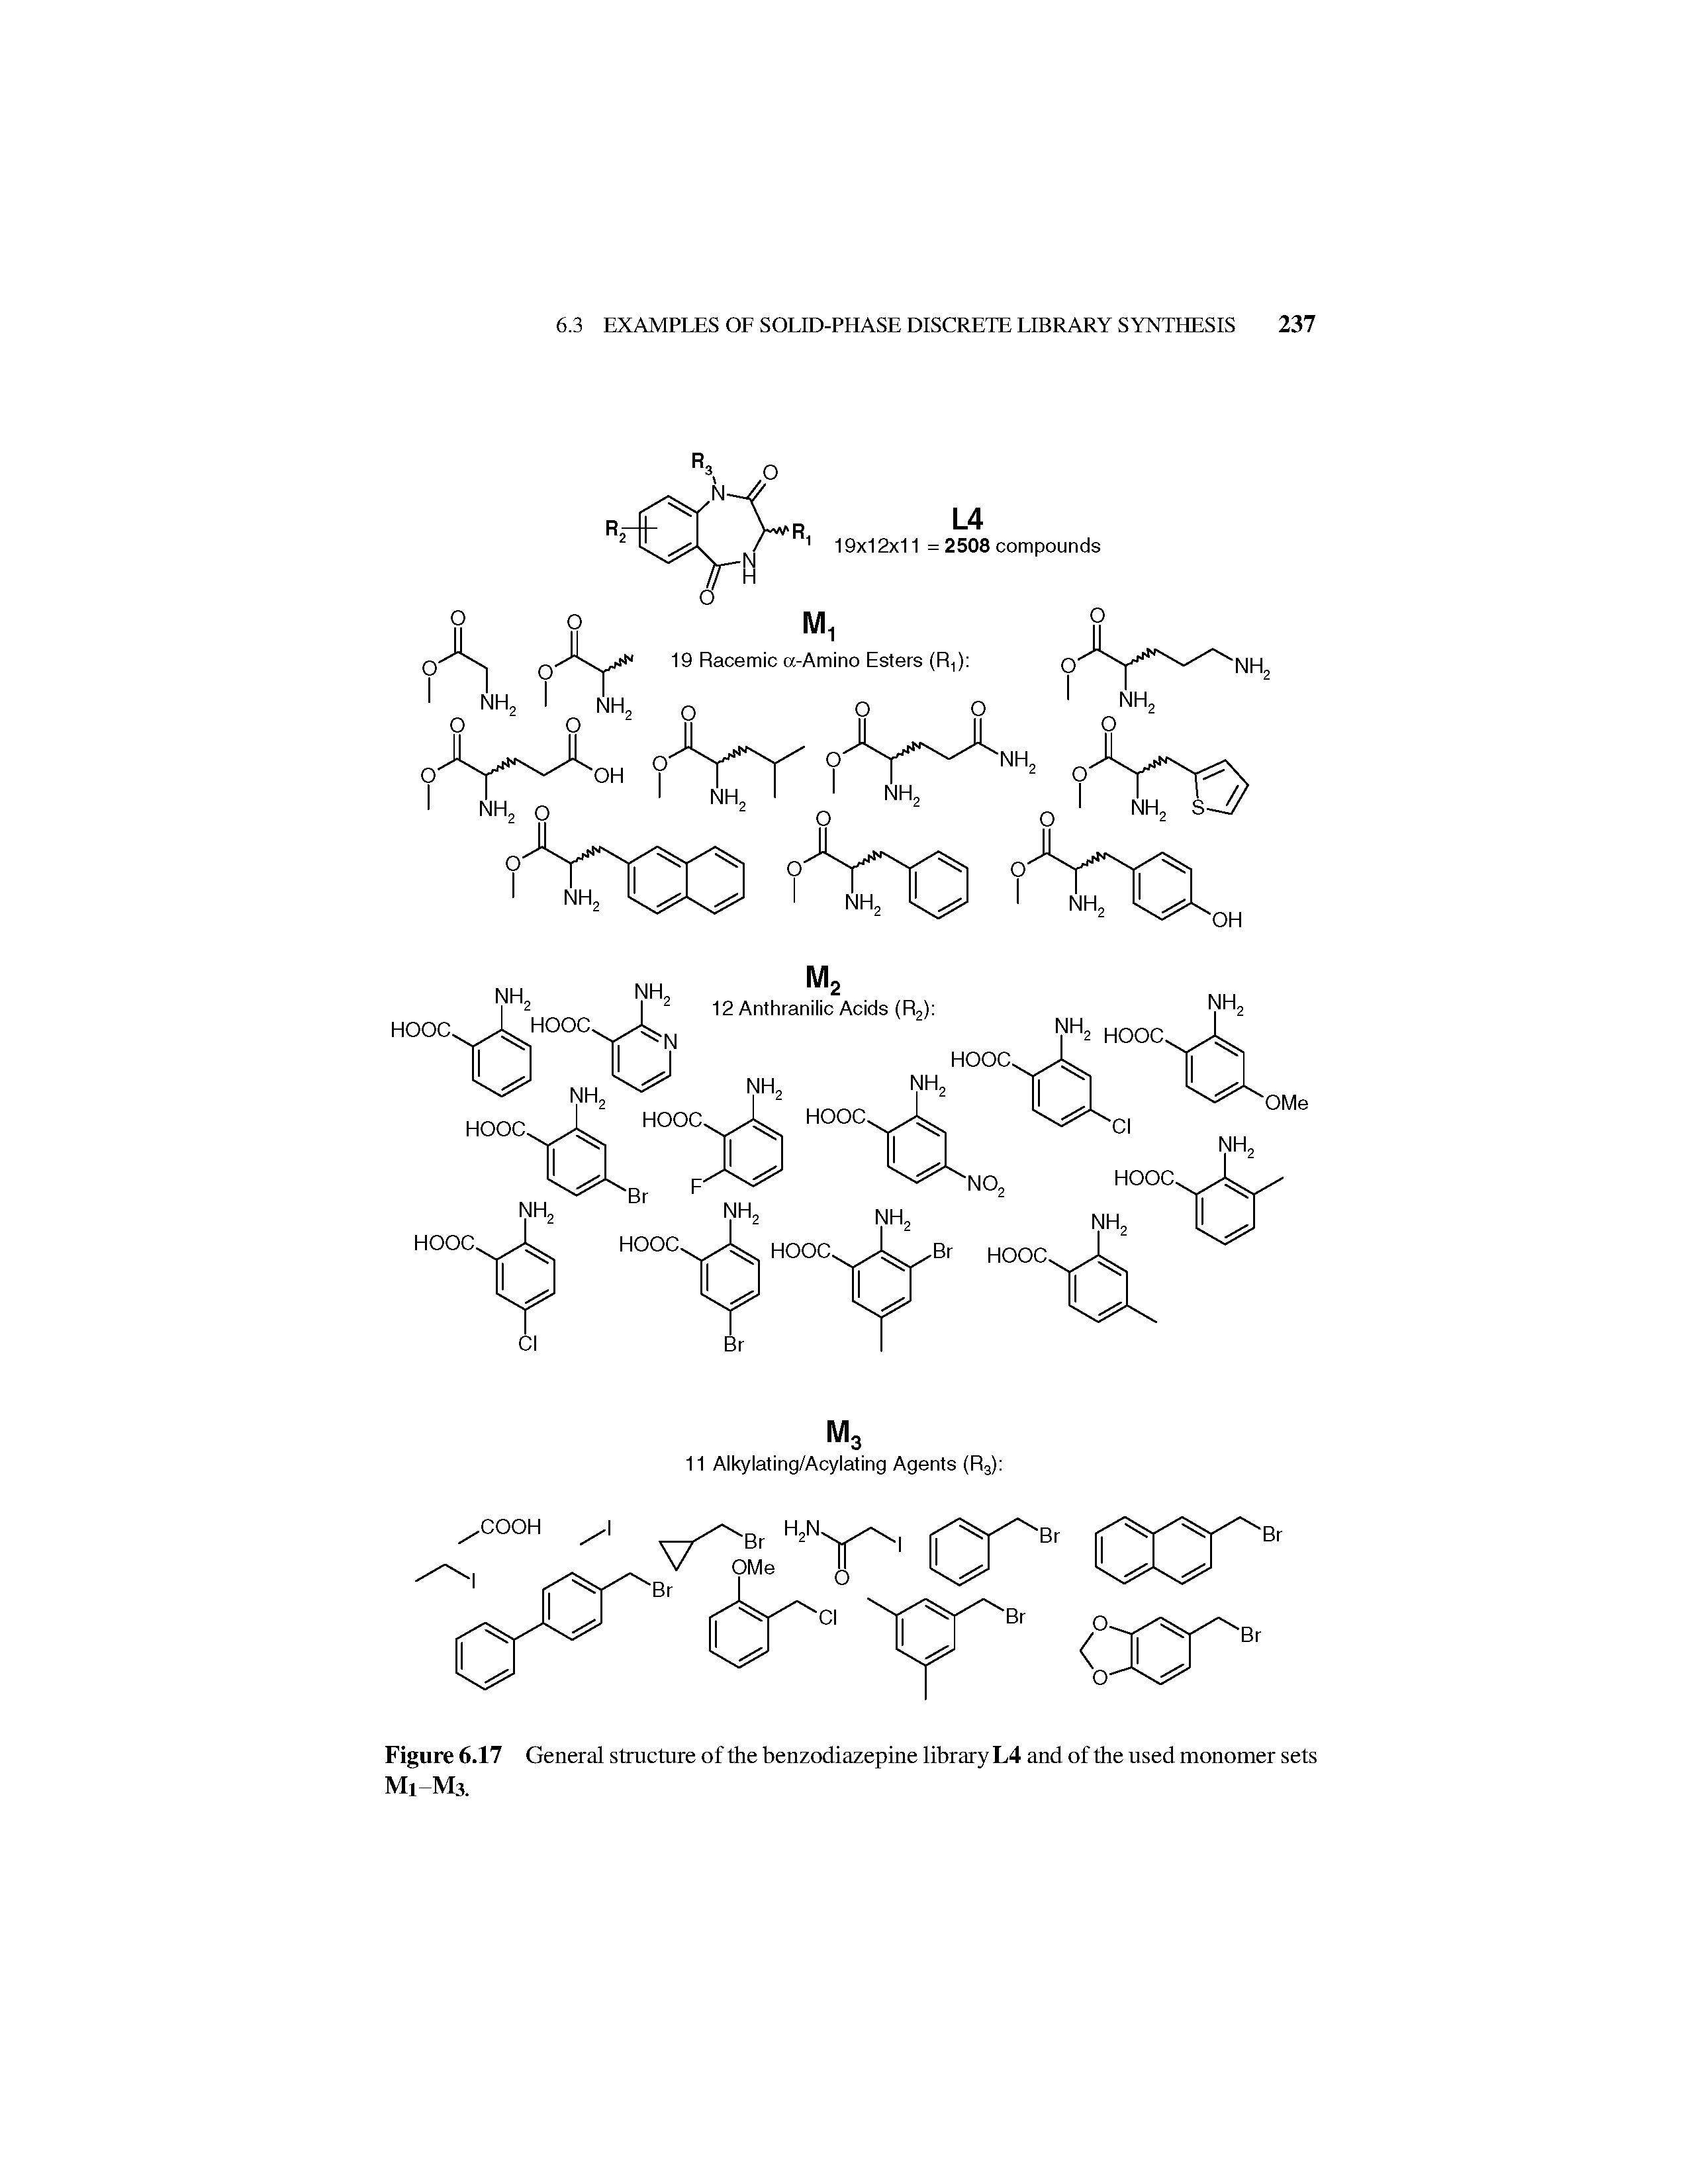 Figure 6.17 General structure of the benzodiazepine library L4 and of the used monomer sets Ml M3.